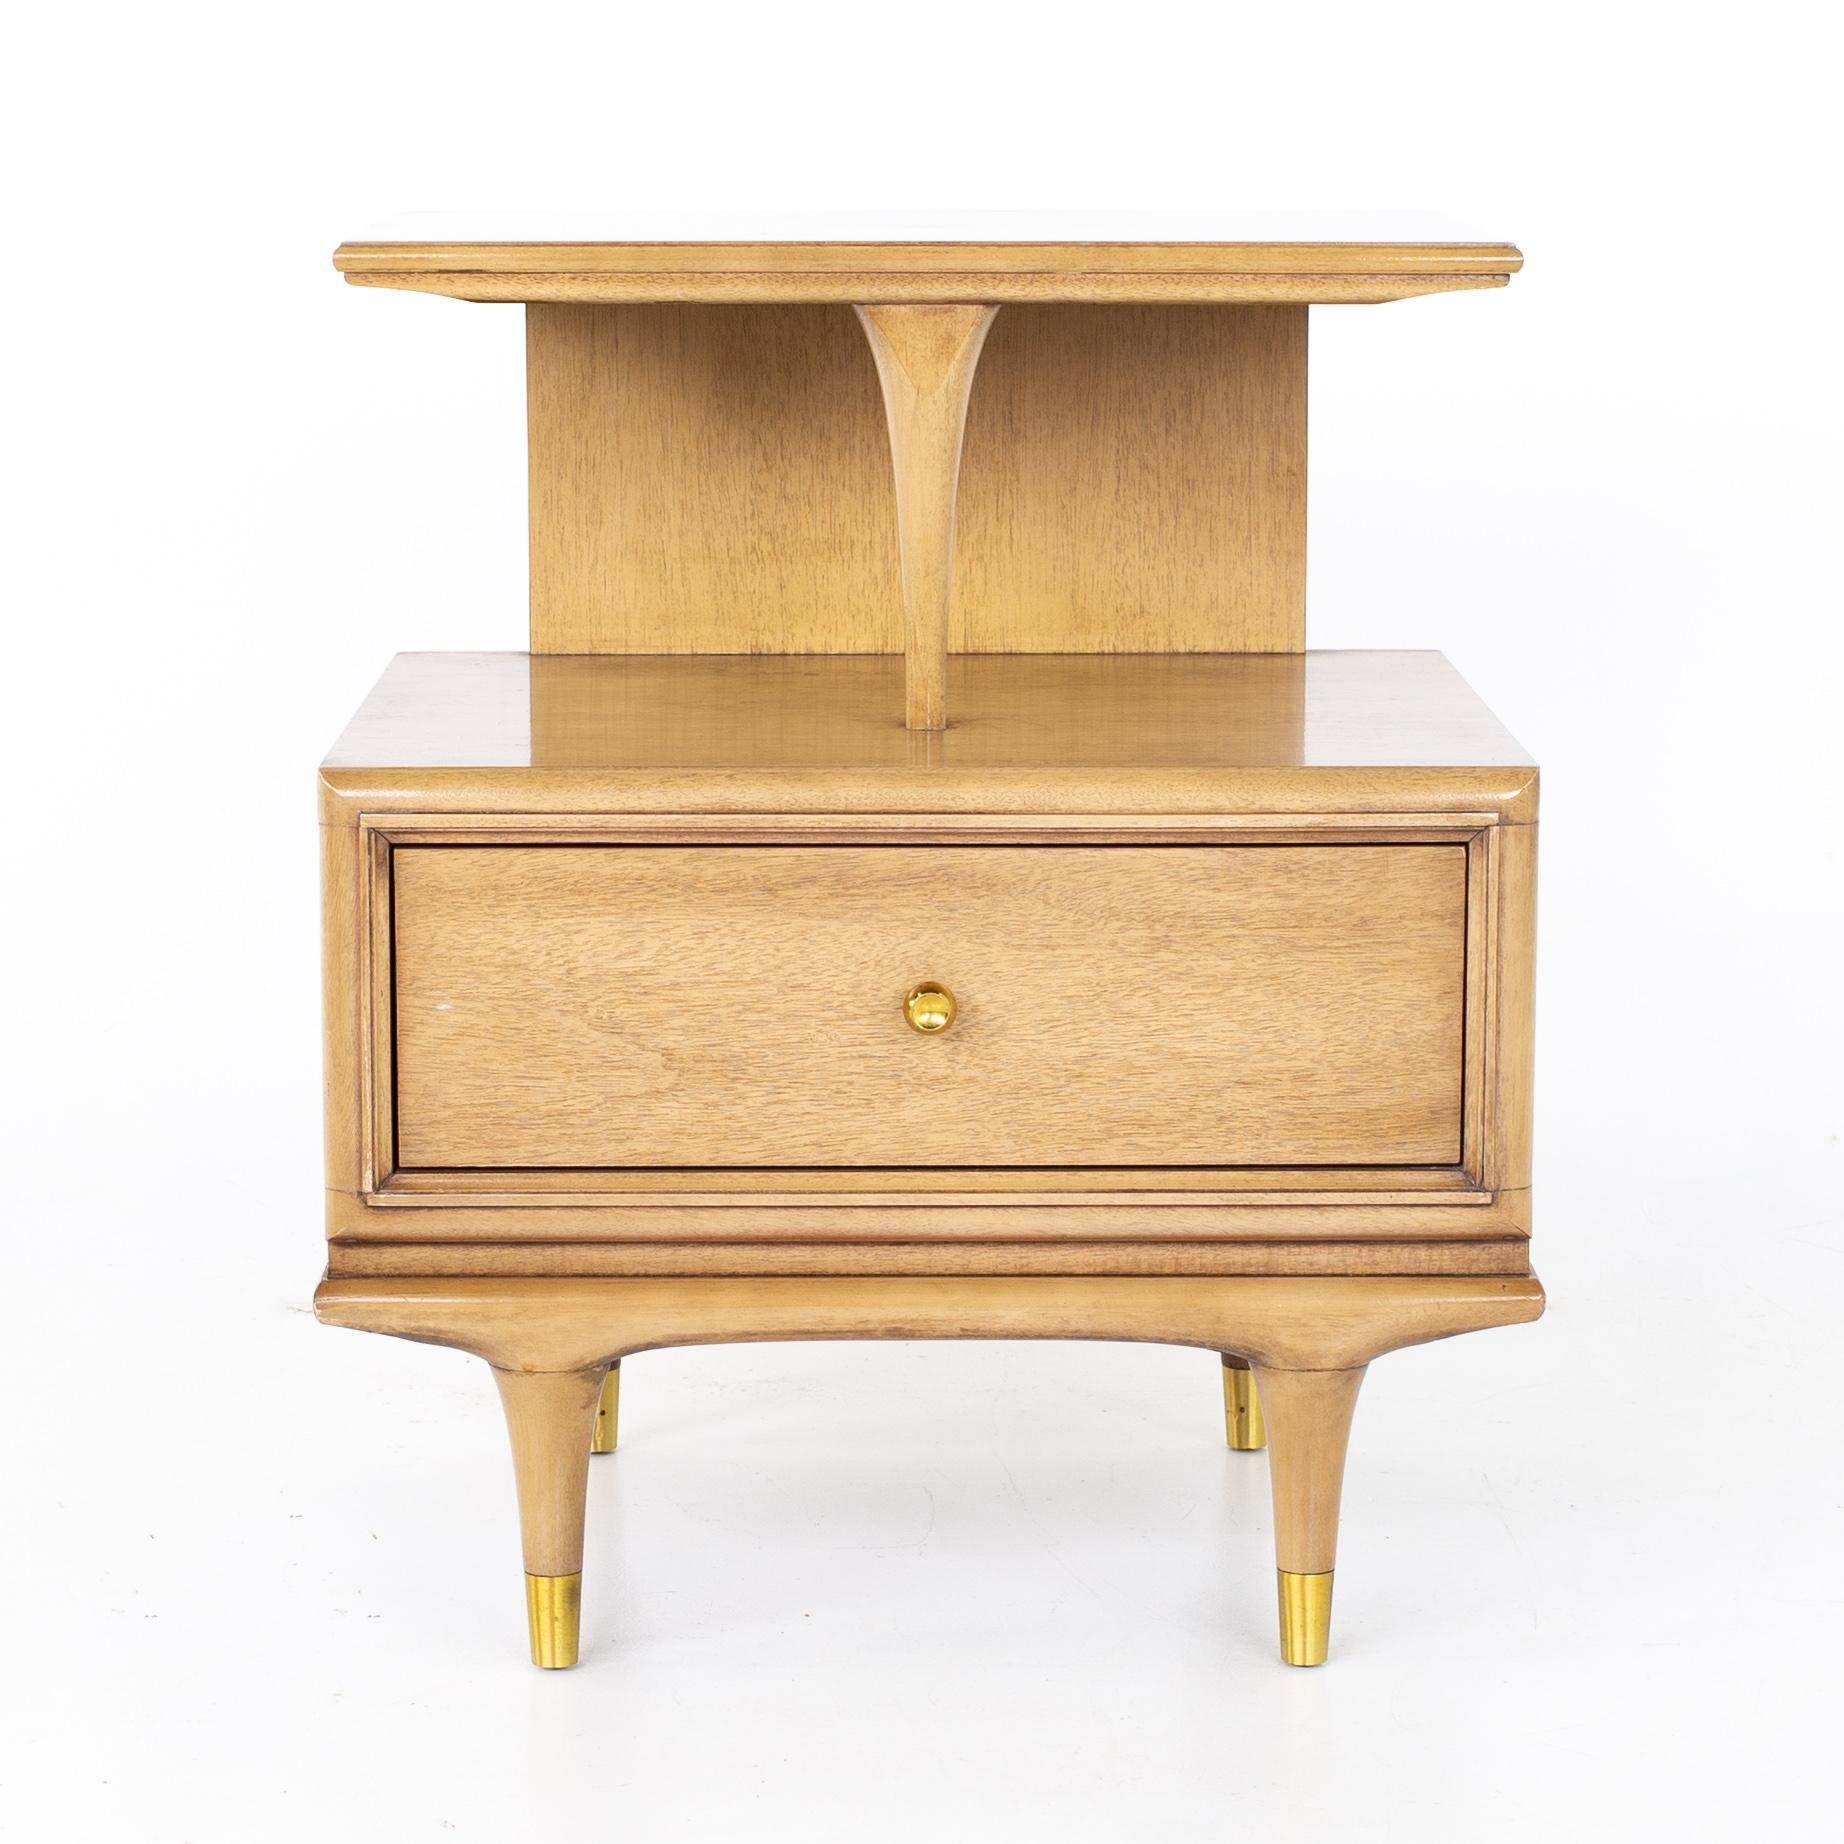 Kent Coffey Continental mid century walnut and brass nightstand

Nightstand measures: 22 wide x 18 deep x 26.5 inches high

All pieces of furniture can be had in what we call restored vintage condition. That means the piece is restored upon